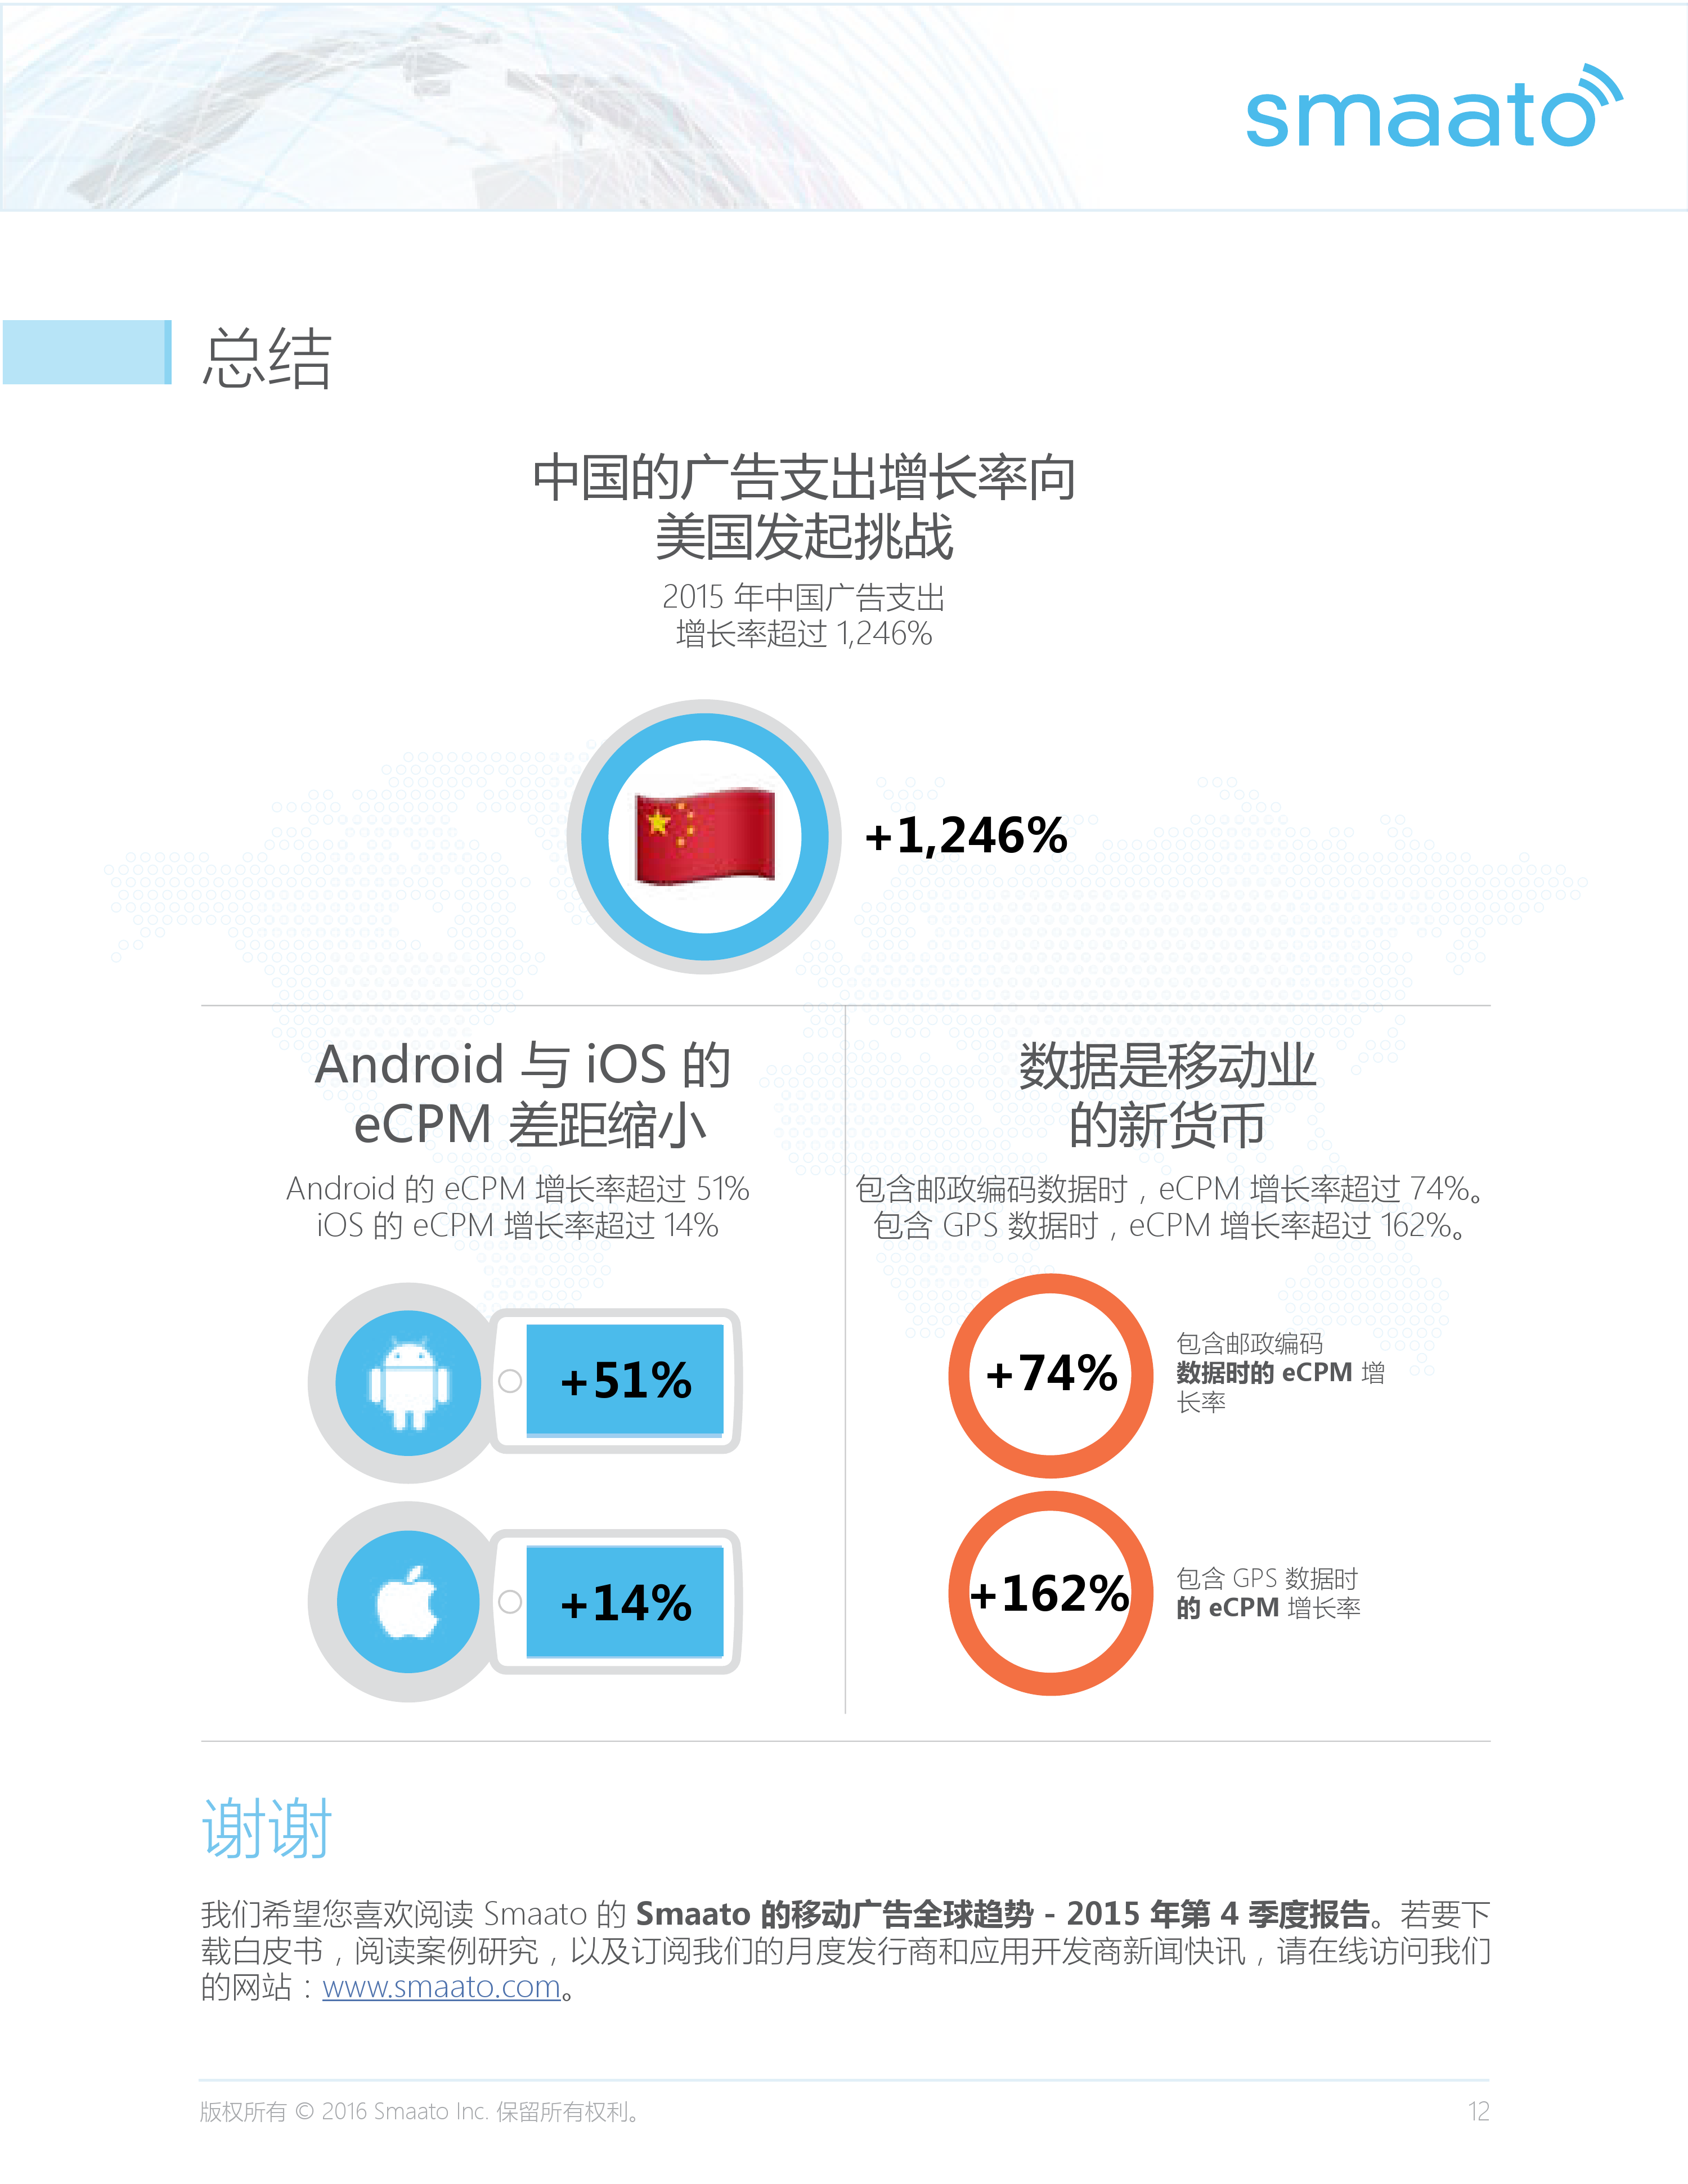 Smaato_Global_Trends_in_Mobile_Advertising_Report_Q4_2015_CN_000010